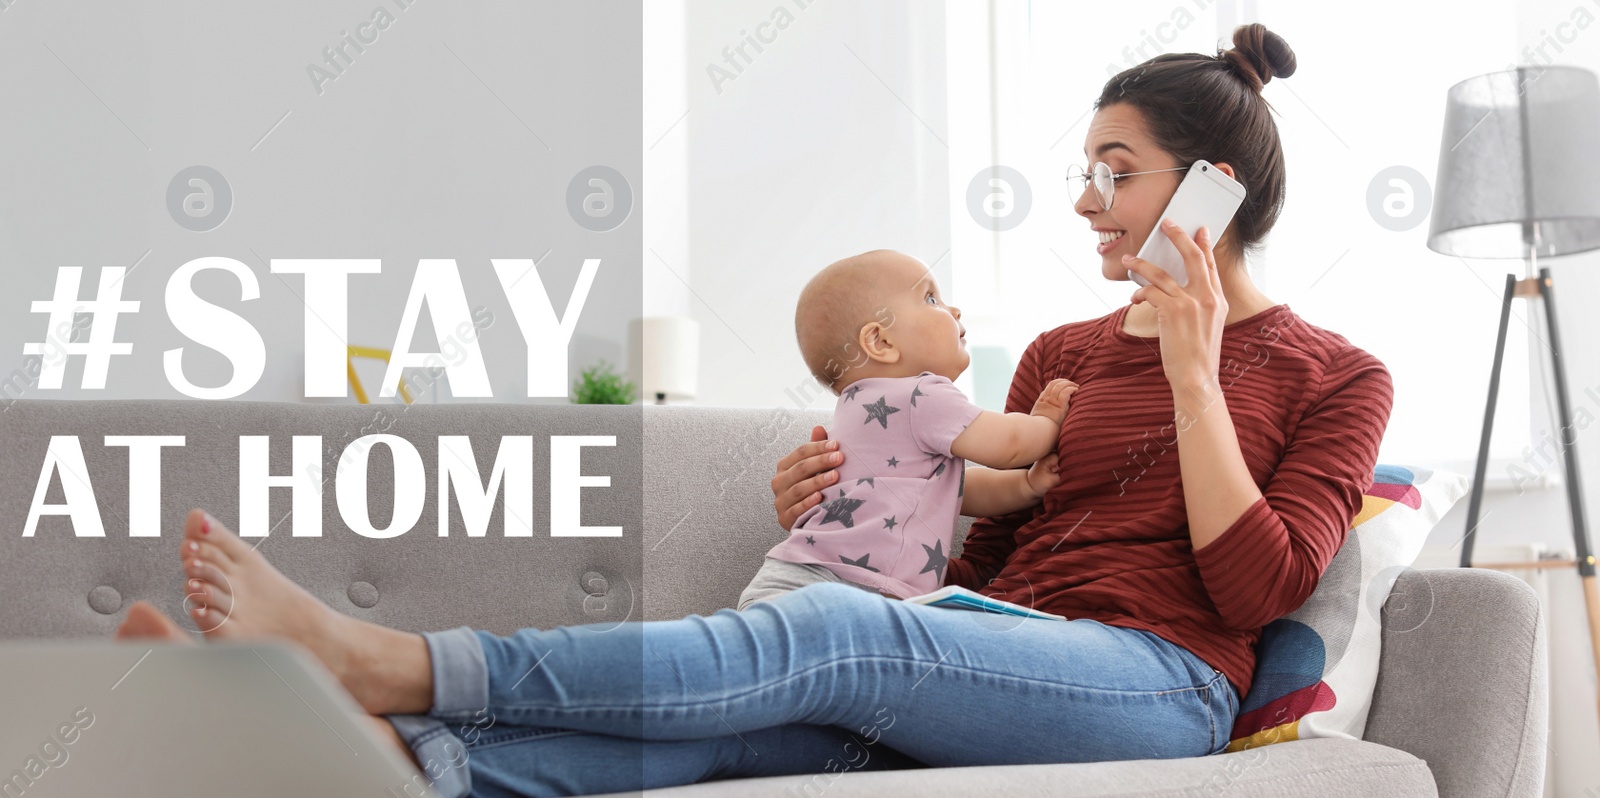 Image of Hashtag Stay At Home - protective measure during coronavirus pandemic, banner design. Young mother with her baby in room